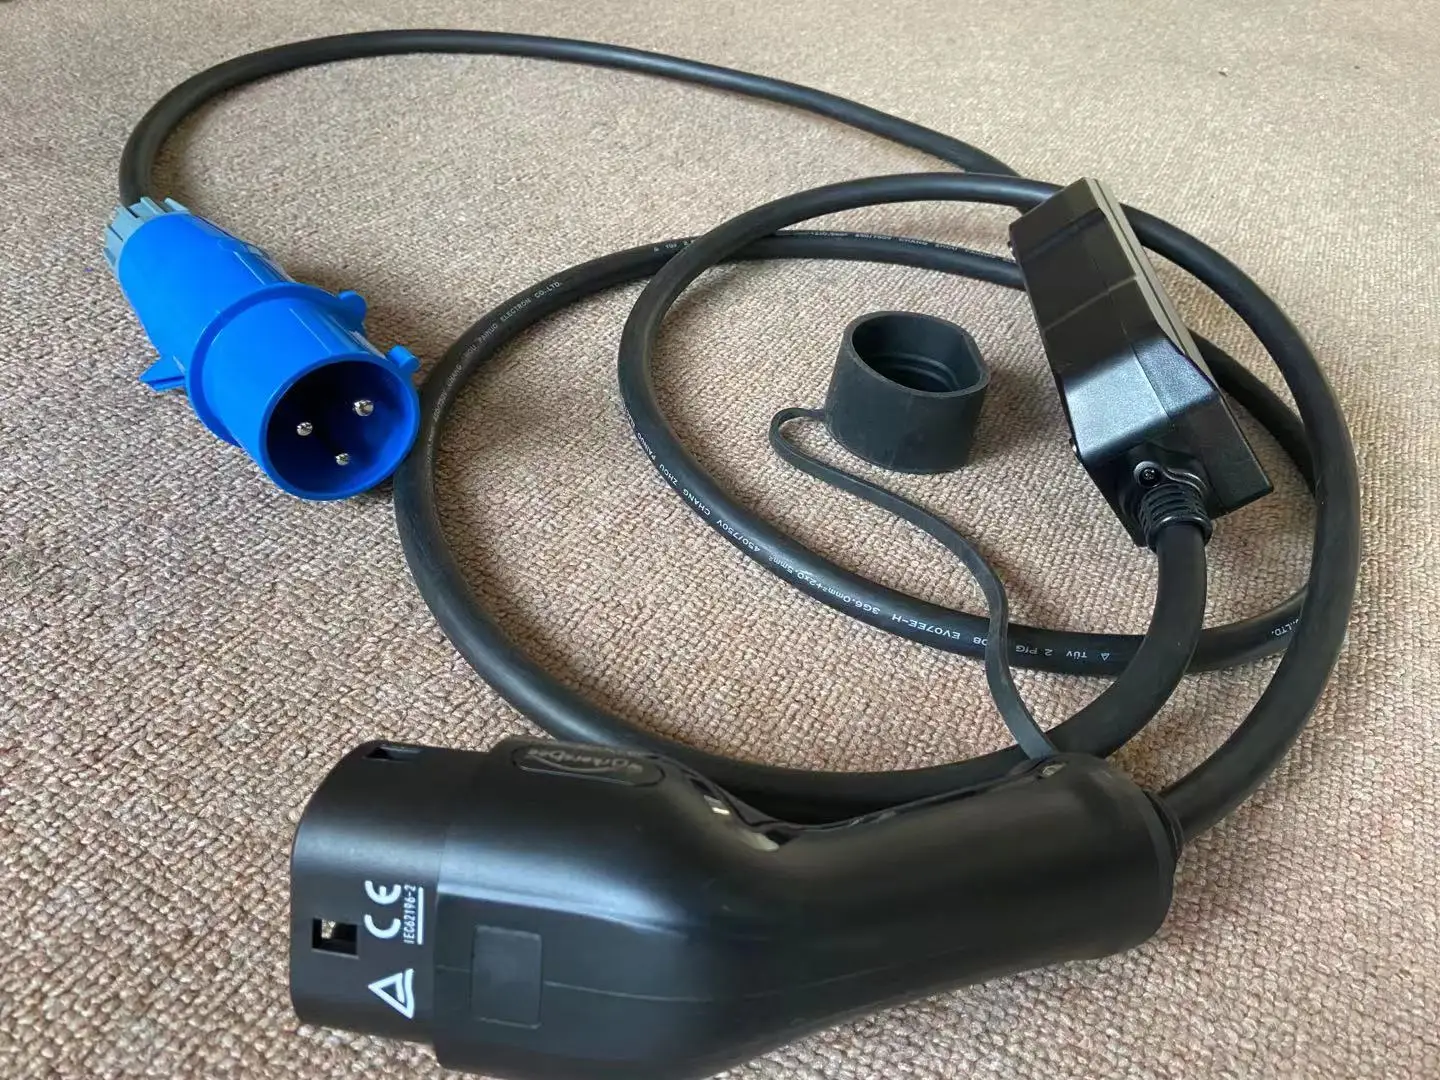 IEC 62196 Workersbee Blue CEE plug 32 A type 2 portable ev charger